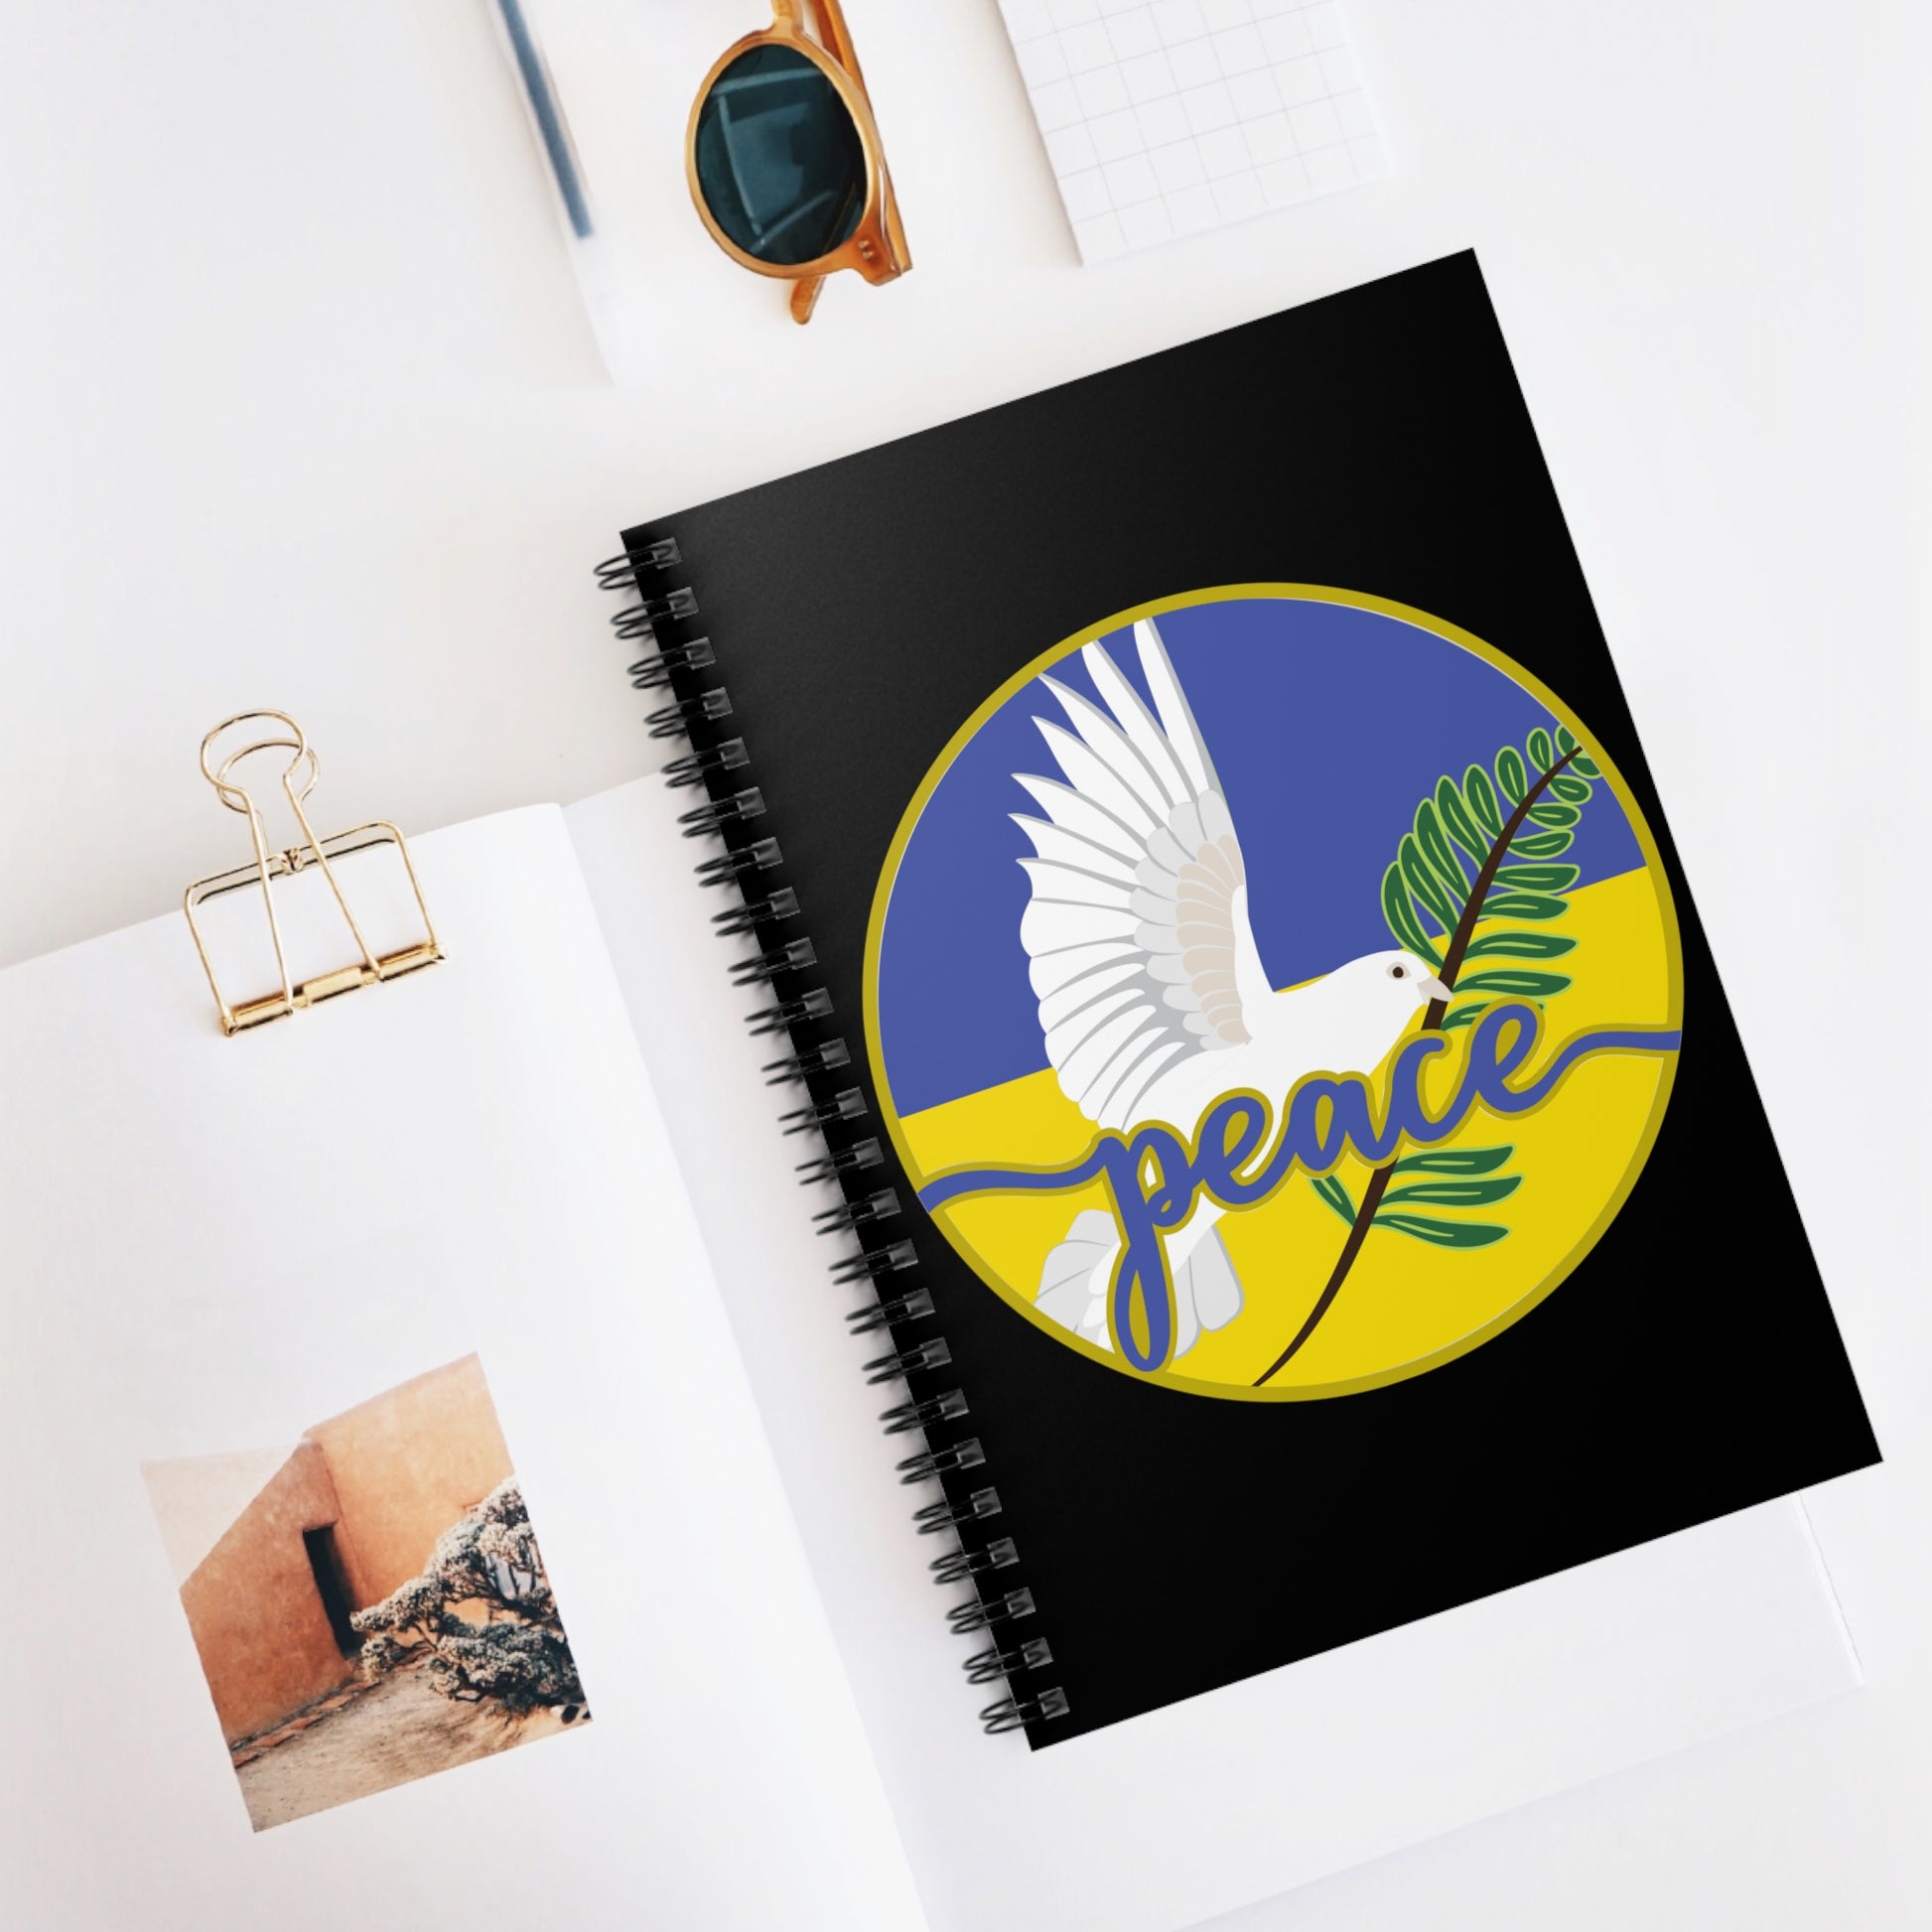 Peace Dove: Spiral Notebook - Log Books - Journals - Diaries - and More Custom Printed by TheGlassyLass